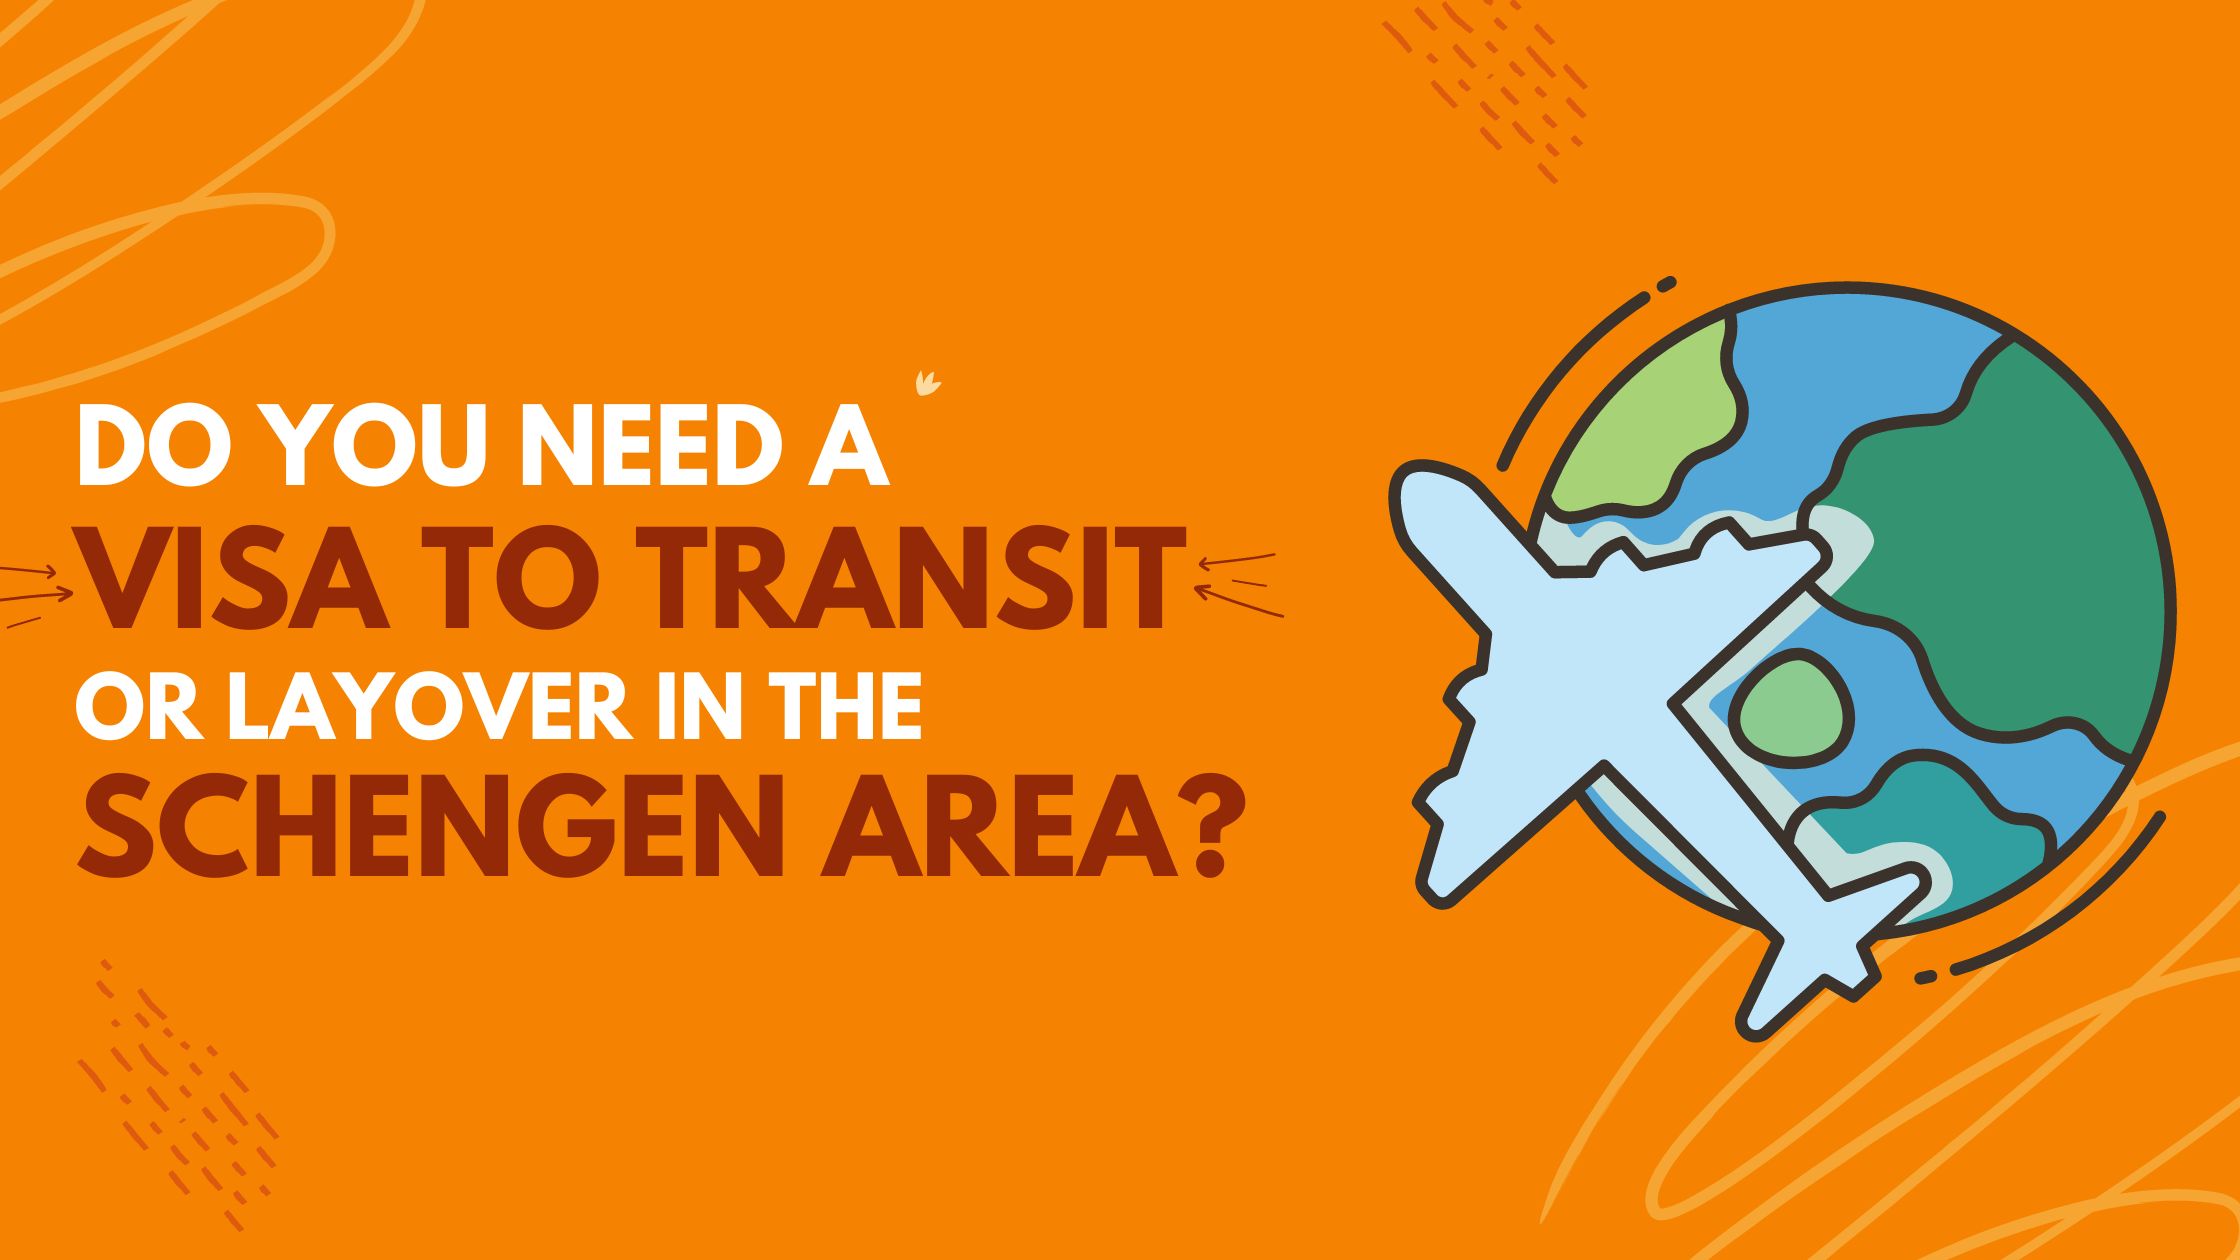 Do You Need A Visa To Transit (or Layover) In The Schengen Area